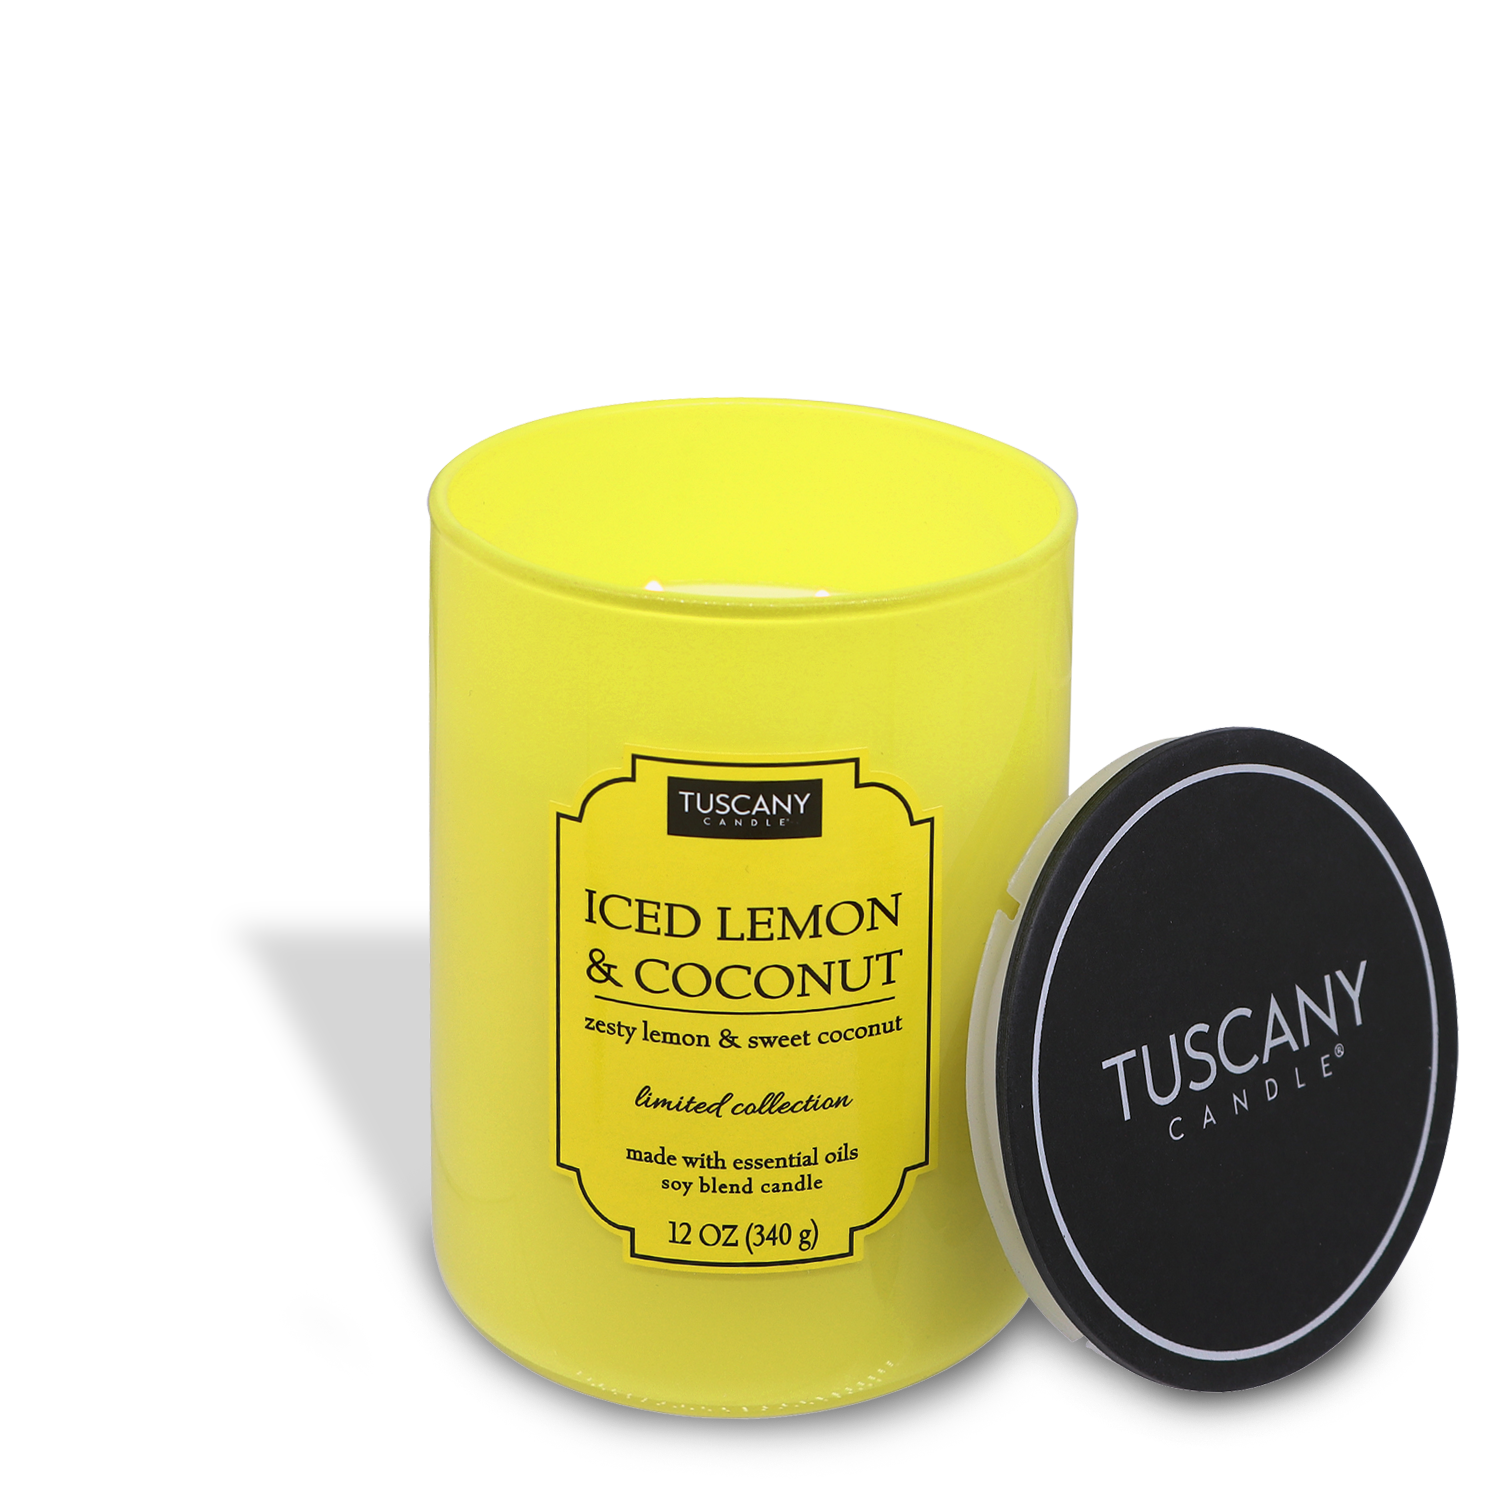 A bright yellow Tuscany Candle® EVD Colorsplash collection candle labeled "Iced Lemon & Coconut" with a black lid on the side, isolated on a white background.